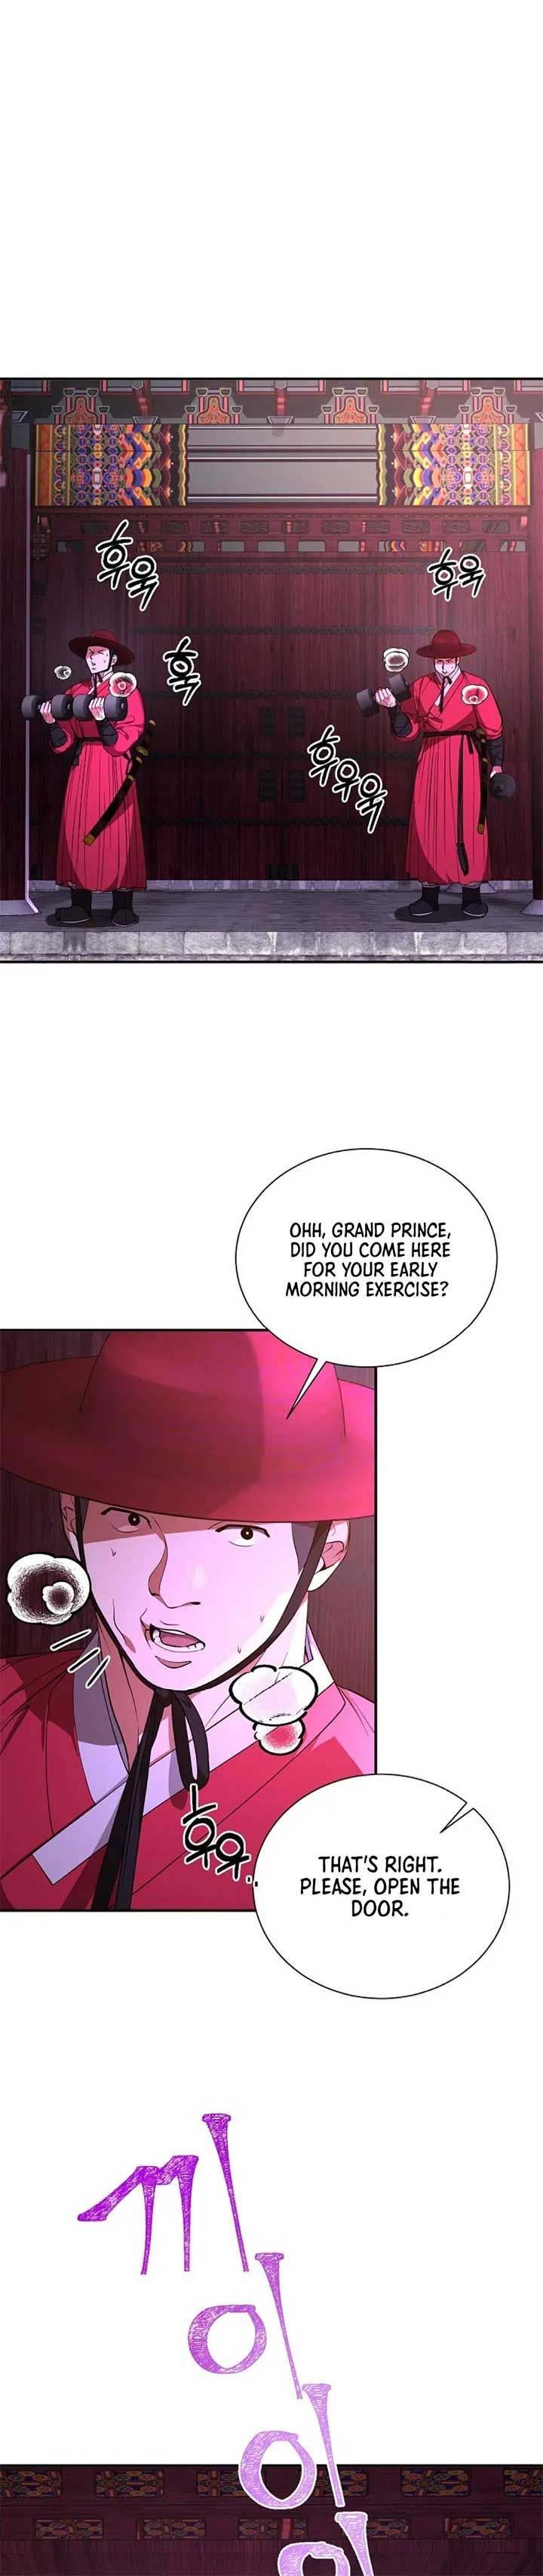 Muscle joseon Chapter 1 - Page 9